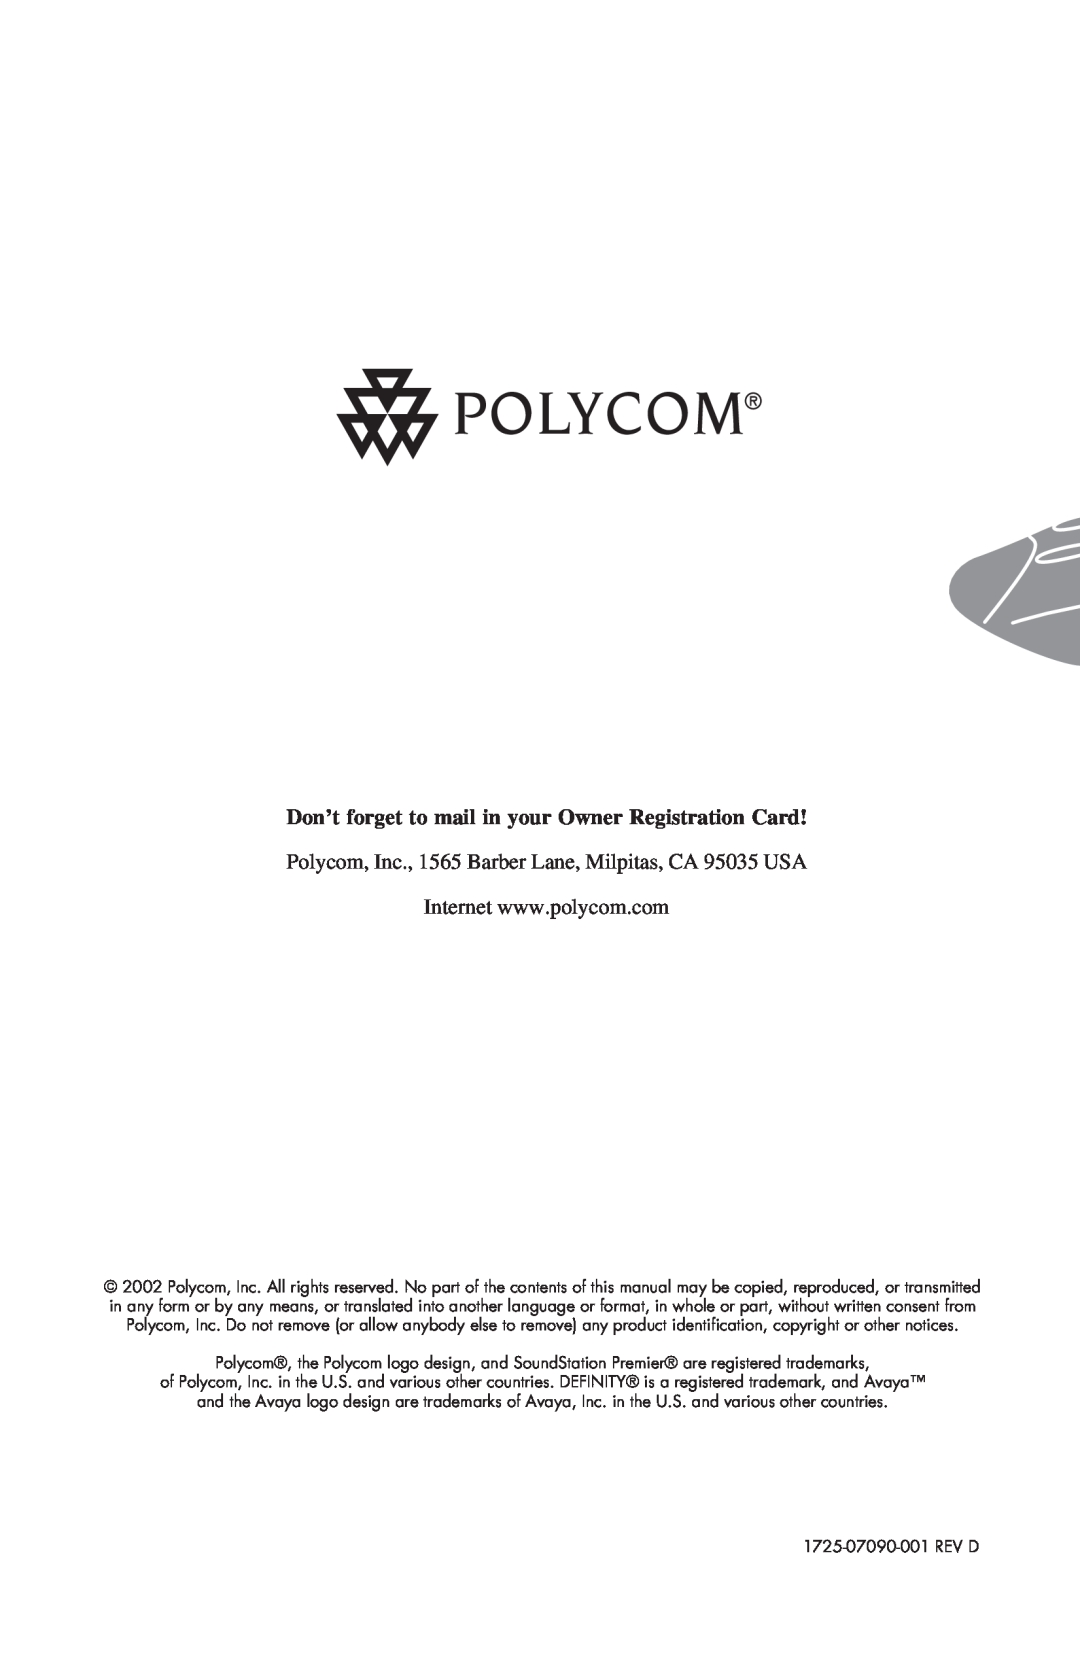 Polycom 550D Don’t forget to mail in your Owner Registration Card, Polycom, Inc., 1565 Barber Lane, Milpitas, CA 95035 USA 